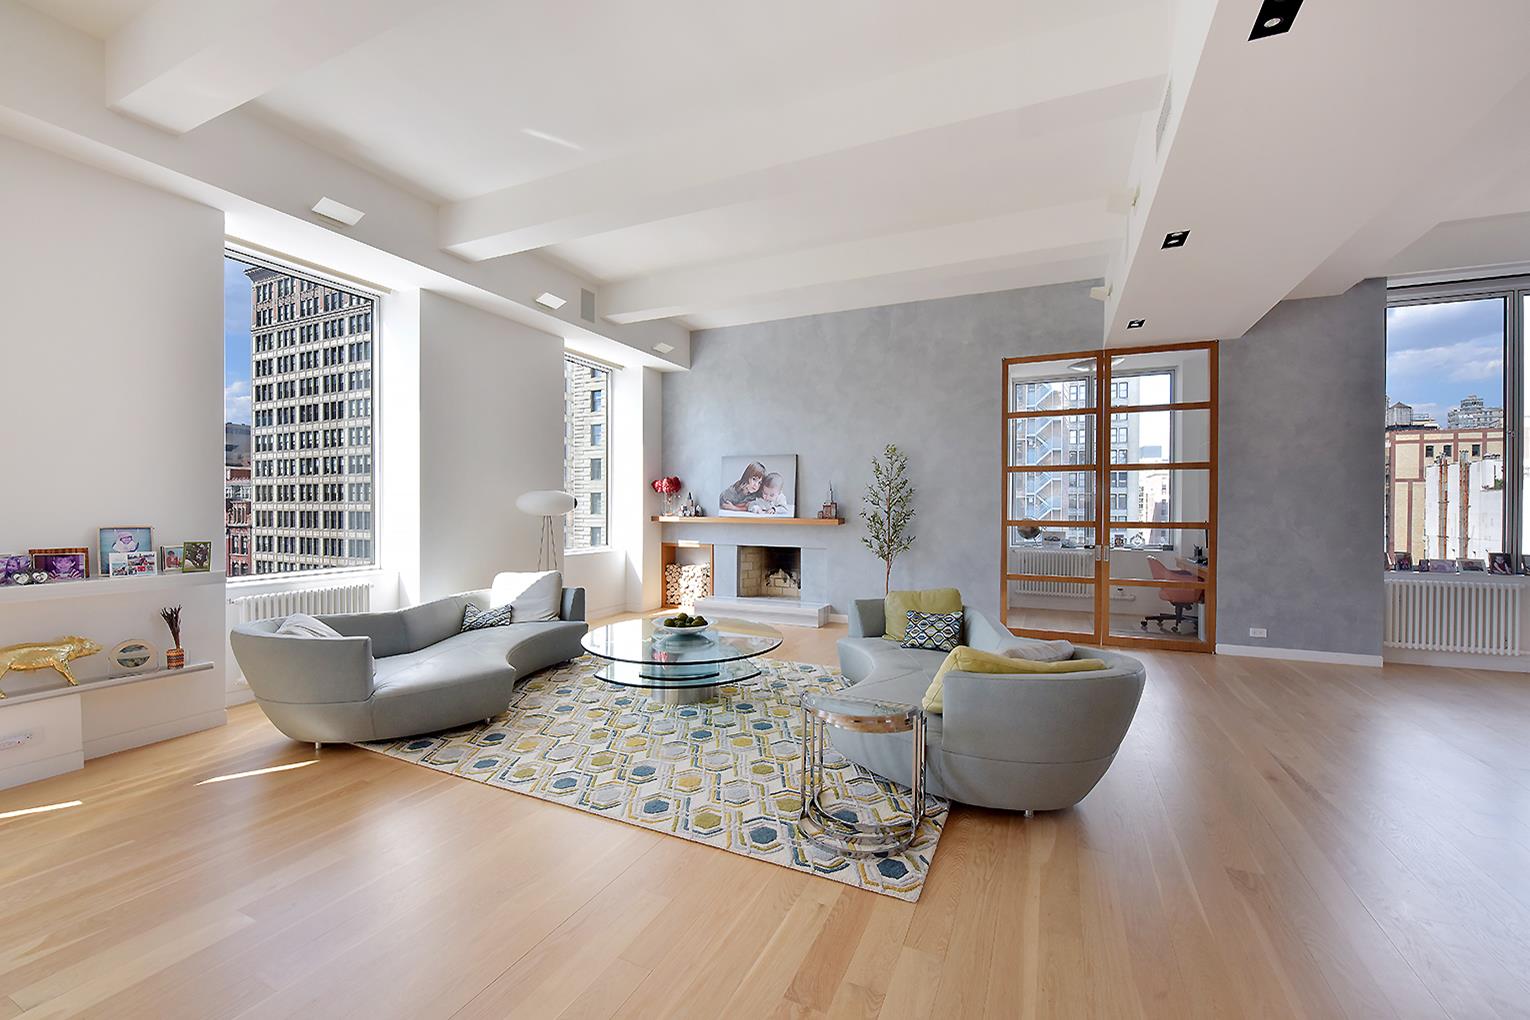 105 East 16th Street 8-Flr, Gramercy Park, Downtown, NYC - 4 Bedrooms  
3.5 Bathrooms  
9 Rooms - 